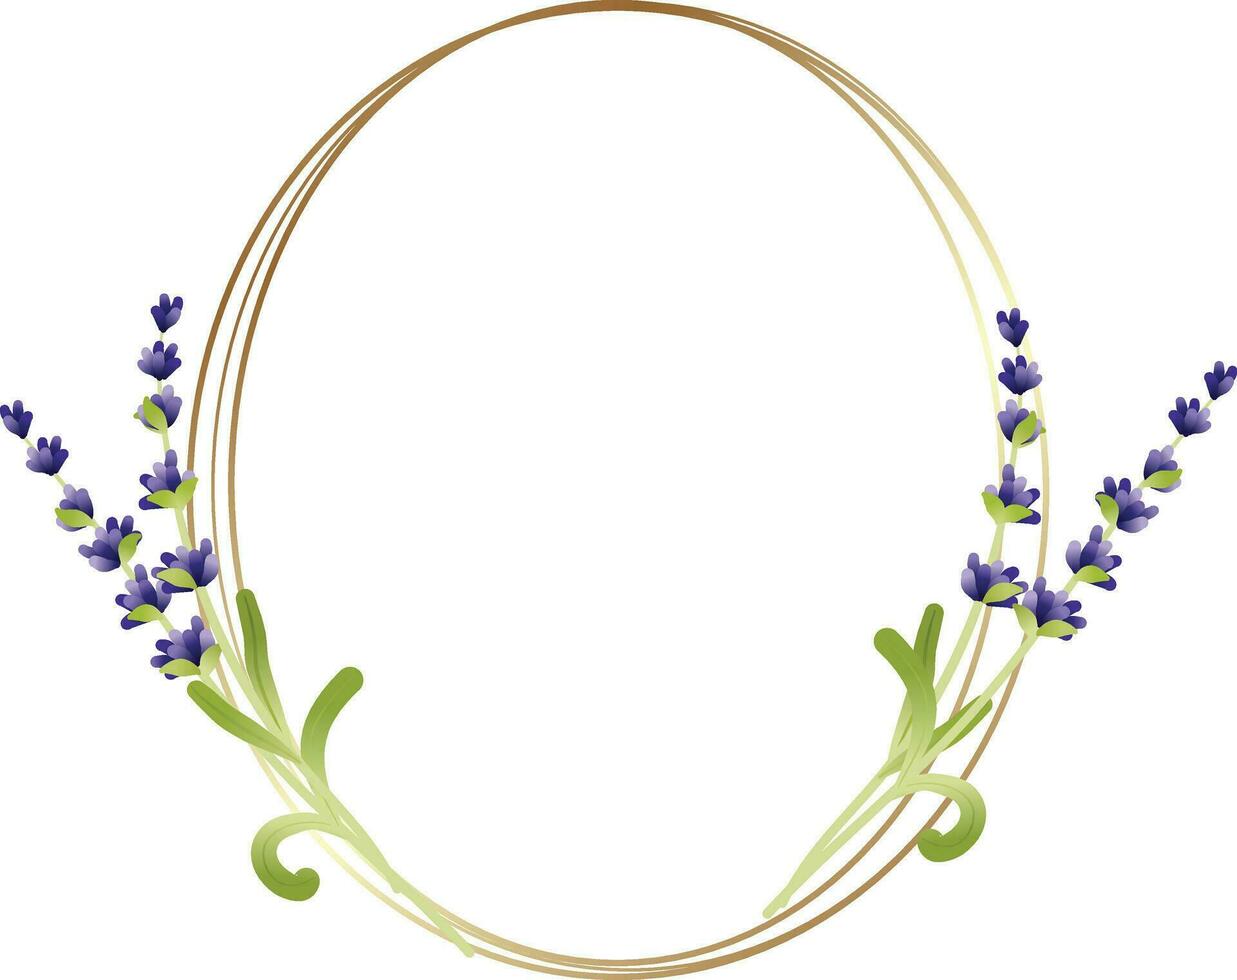 floral frame with purple lavender flowers vector